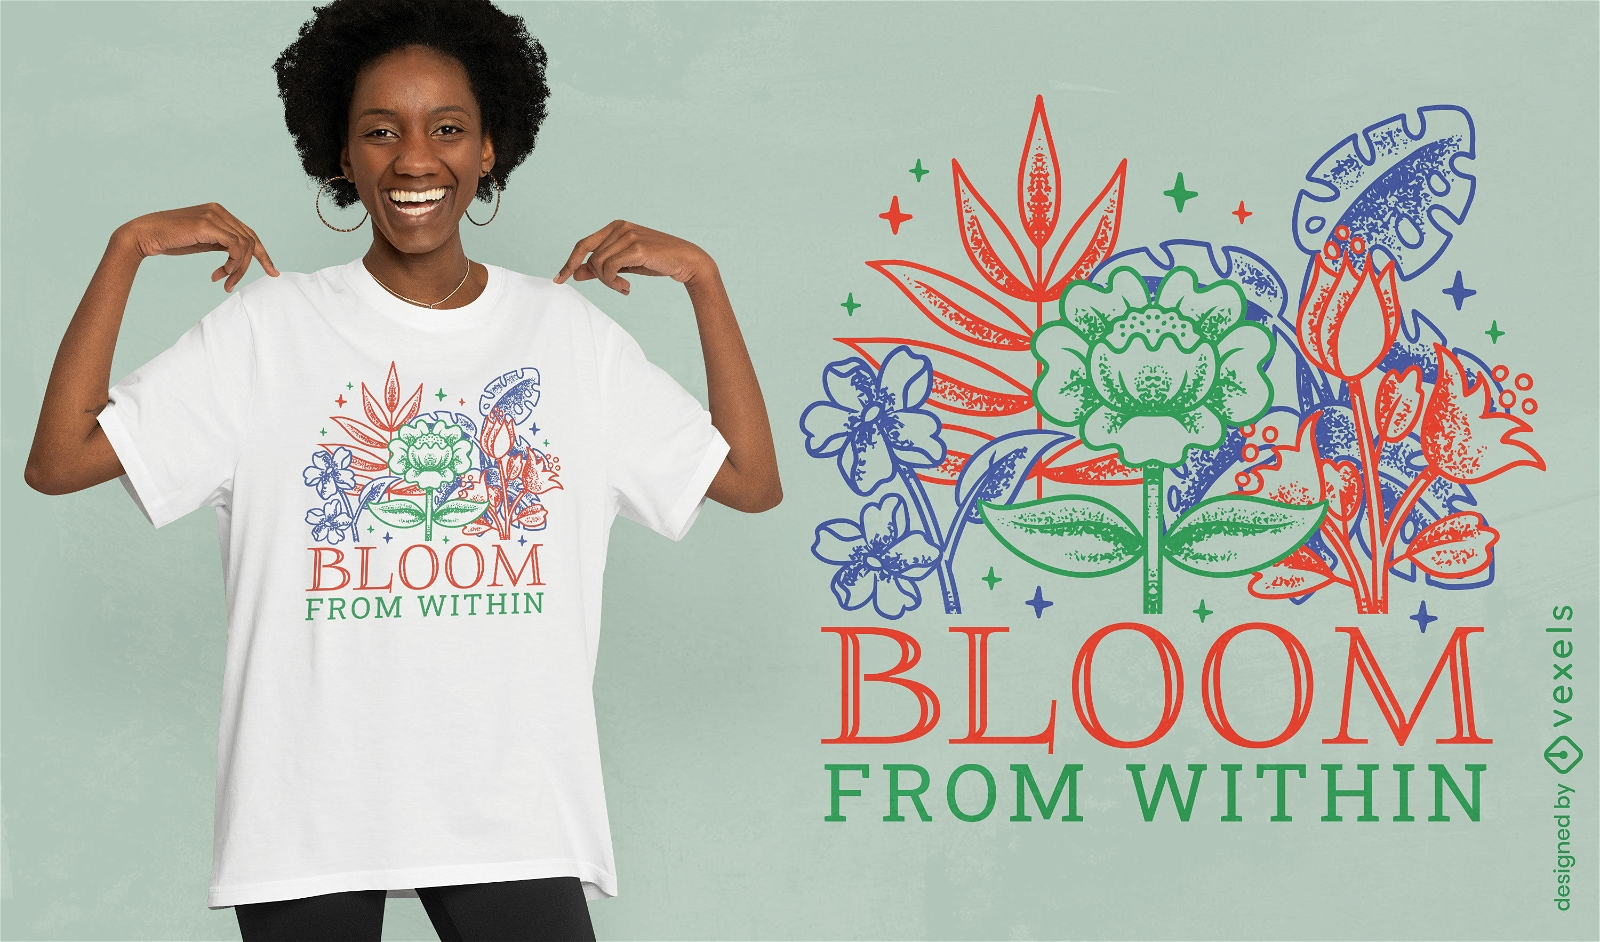 Bloom from within floral t-shirt design